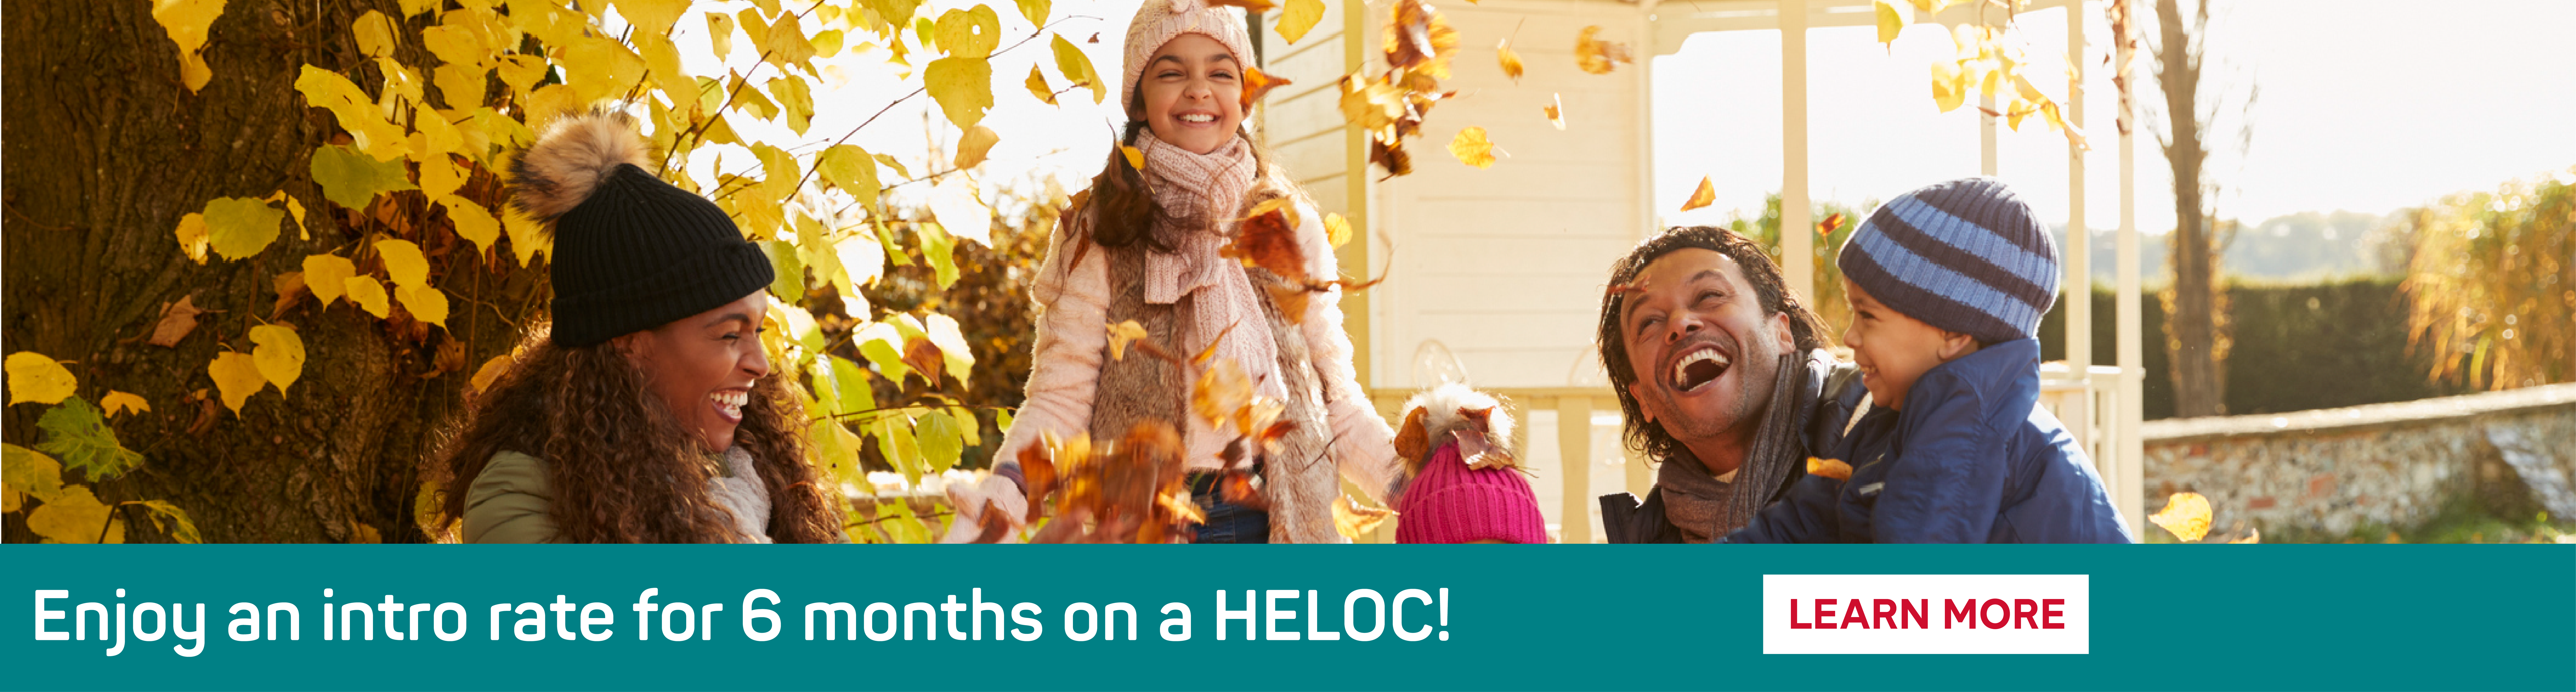 Imagine the possibilities. Home Equity Line of Credit as low as 1.99% APR into rate for 12 months!